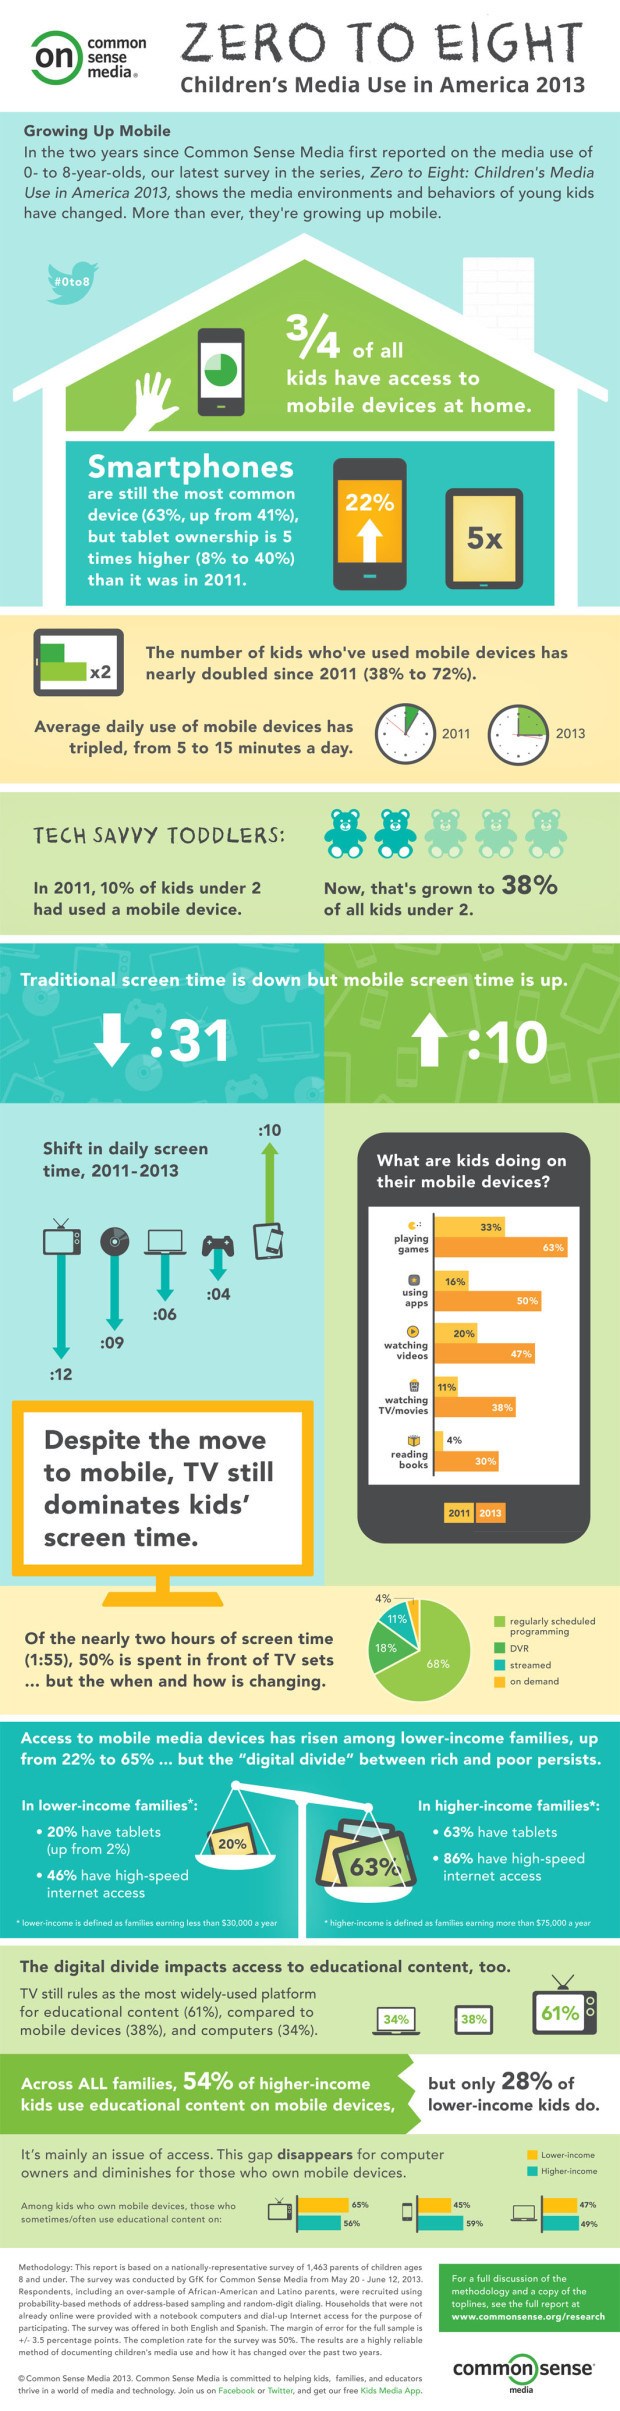 12 Facts of The Powerful New Role of Media In Children's Lives Infographic